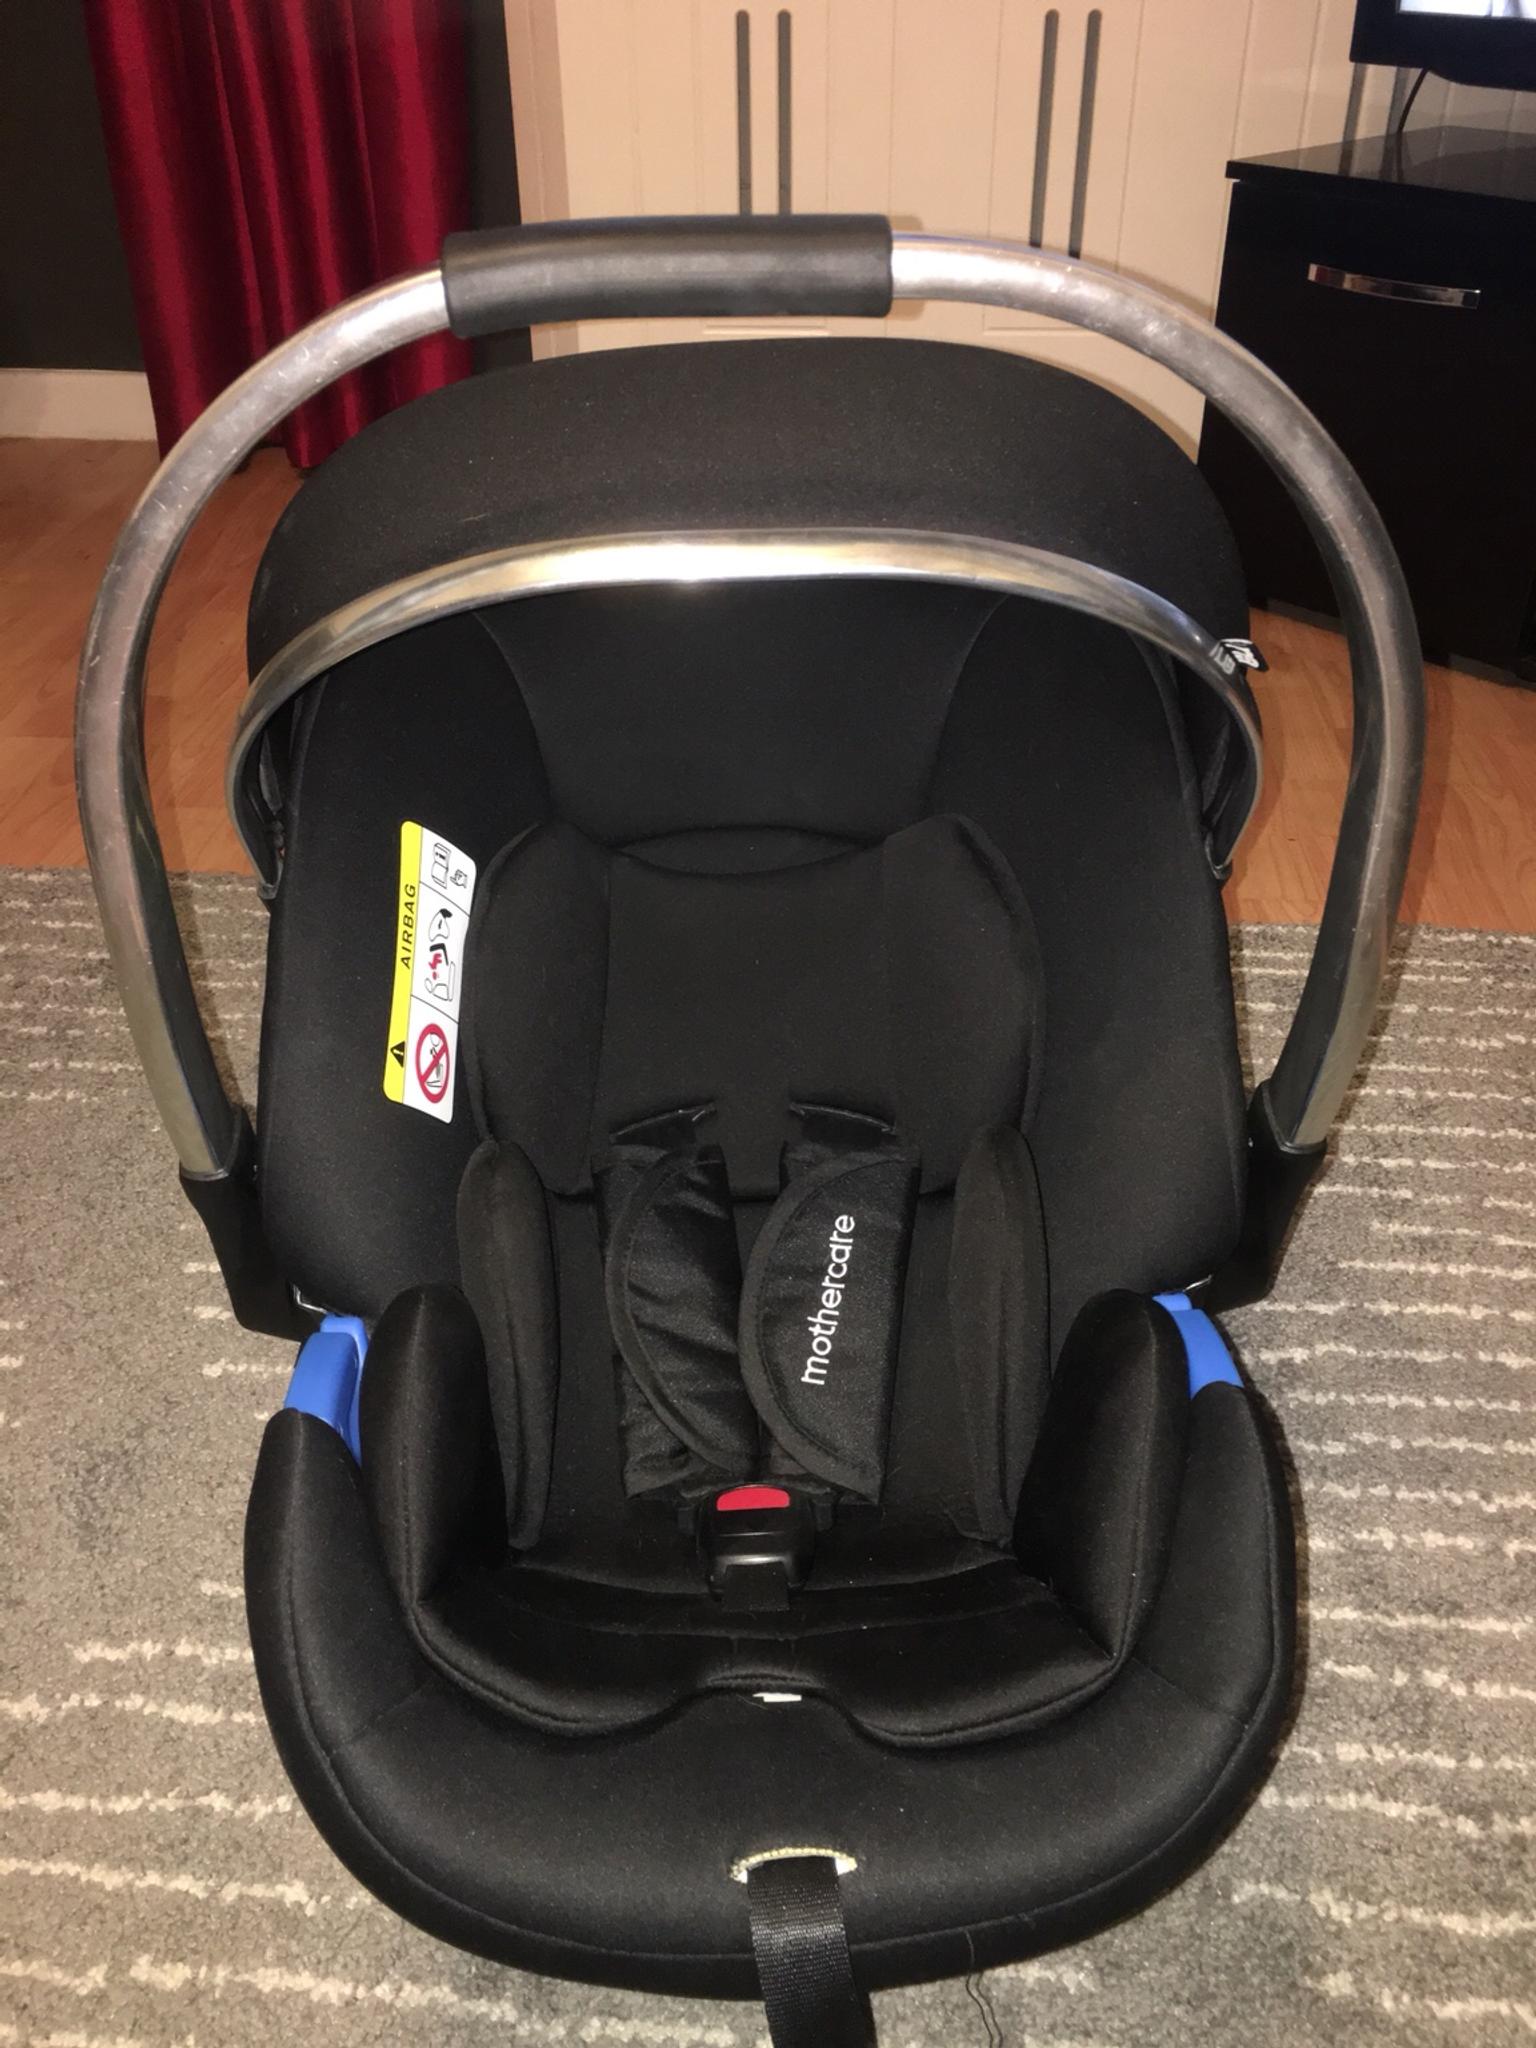 isofix for mothercare journey